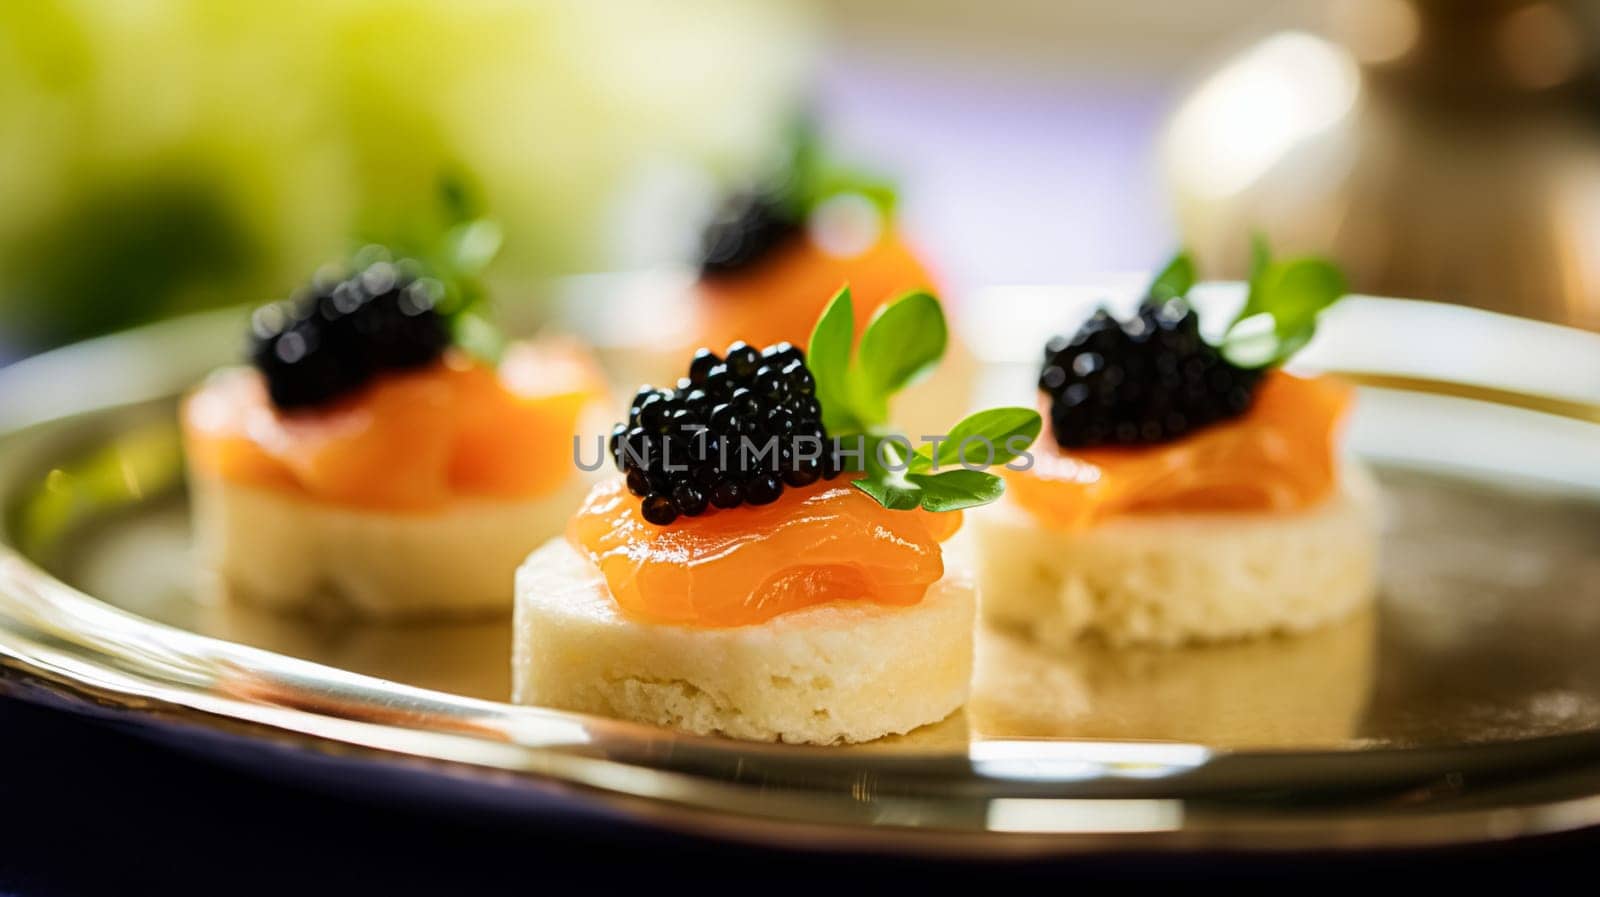 Food, hospitality and room service, starter appetisers with caviar as exquisite cuisine in hotel restaurant a la carte menu, culinary art and fine dining by Anneleven